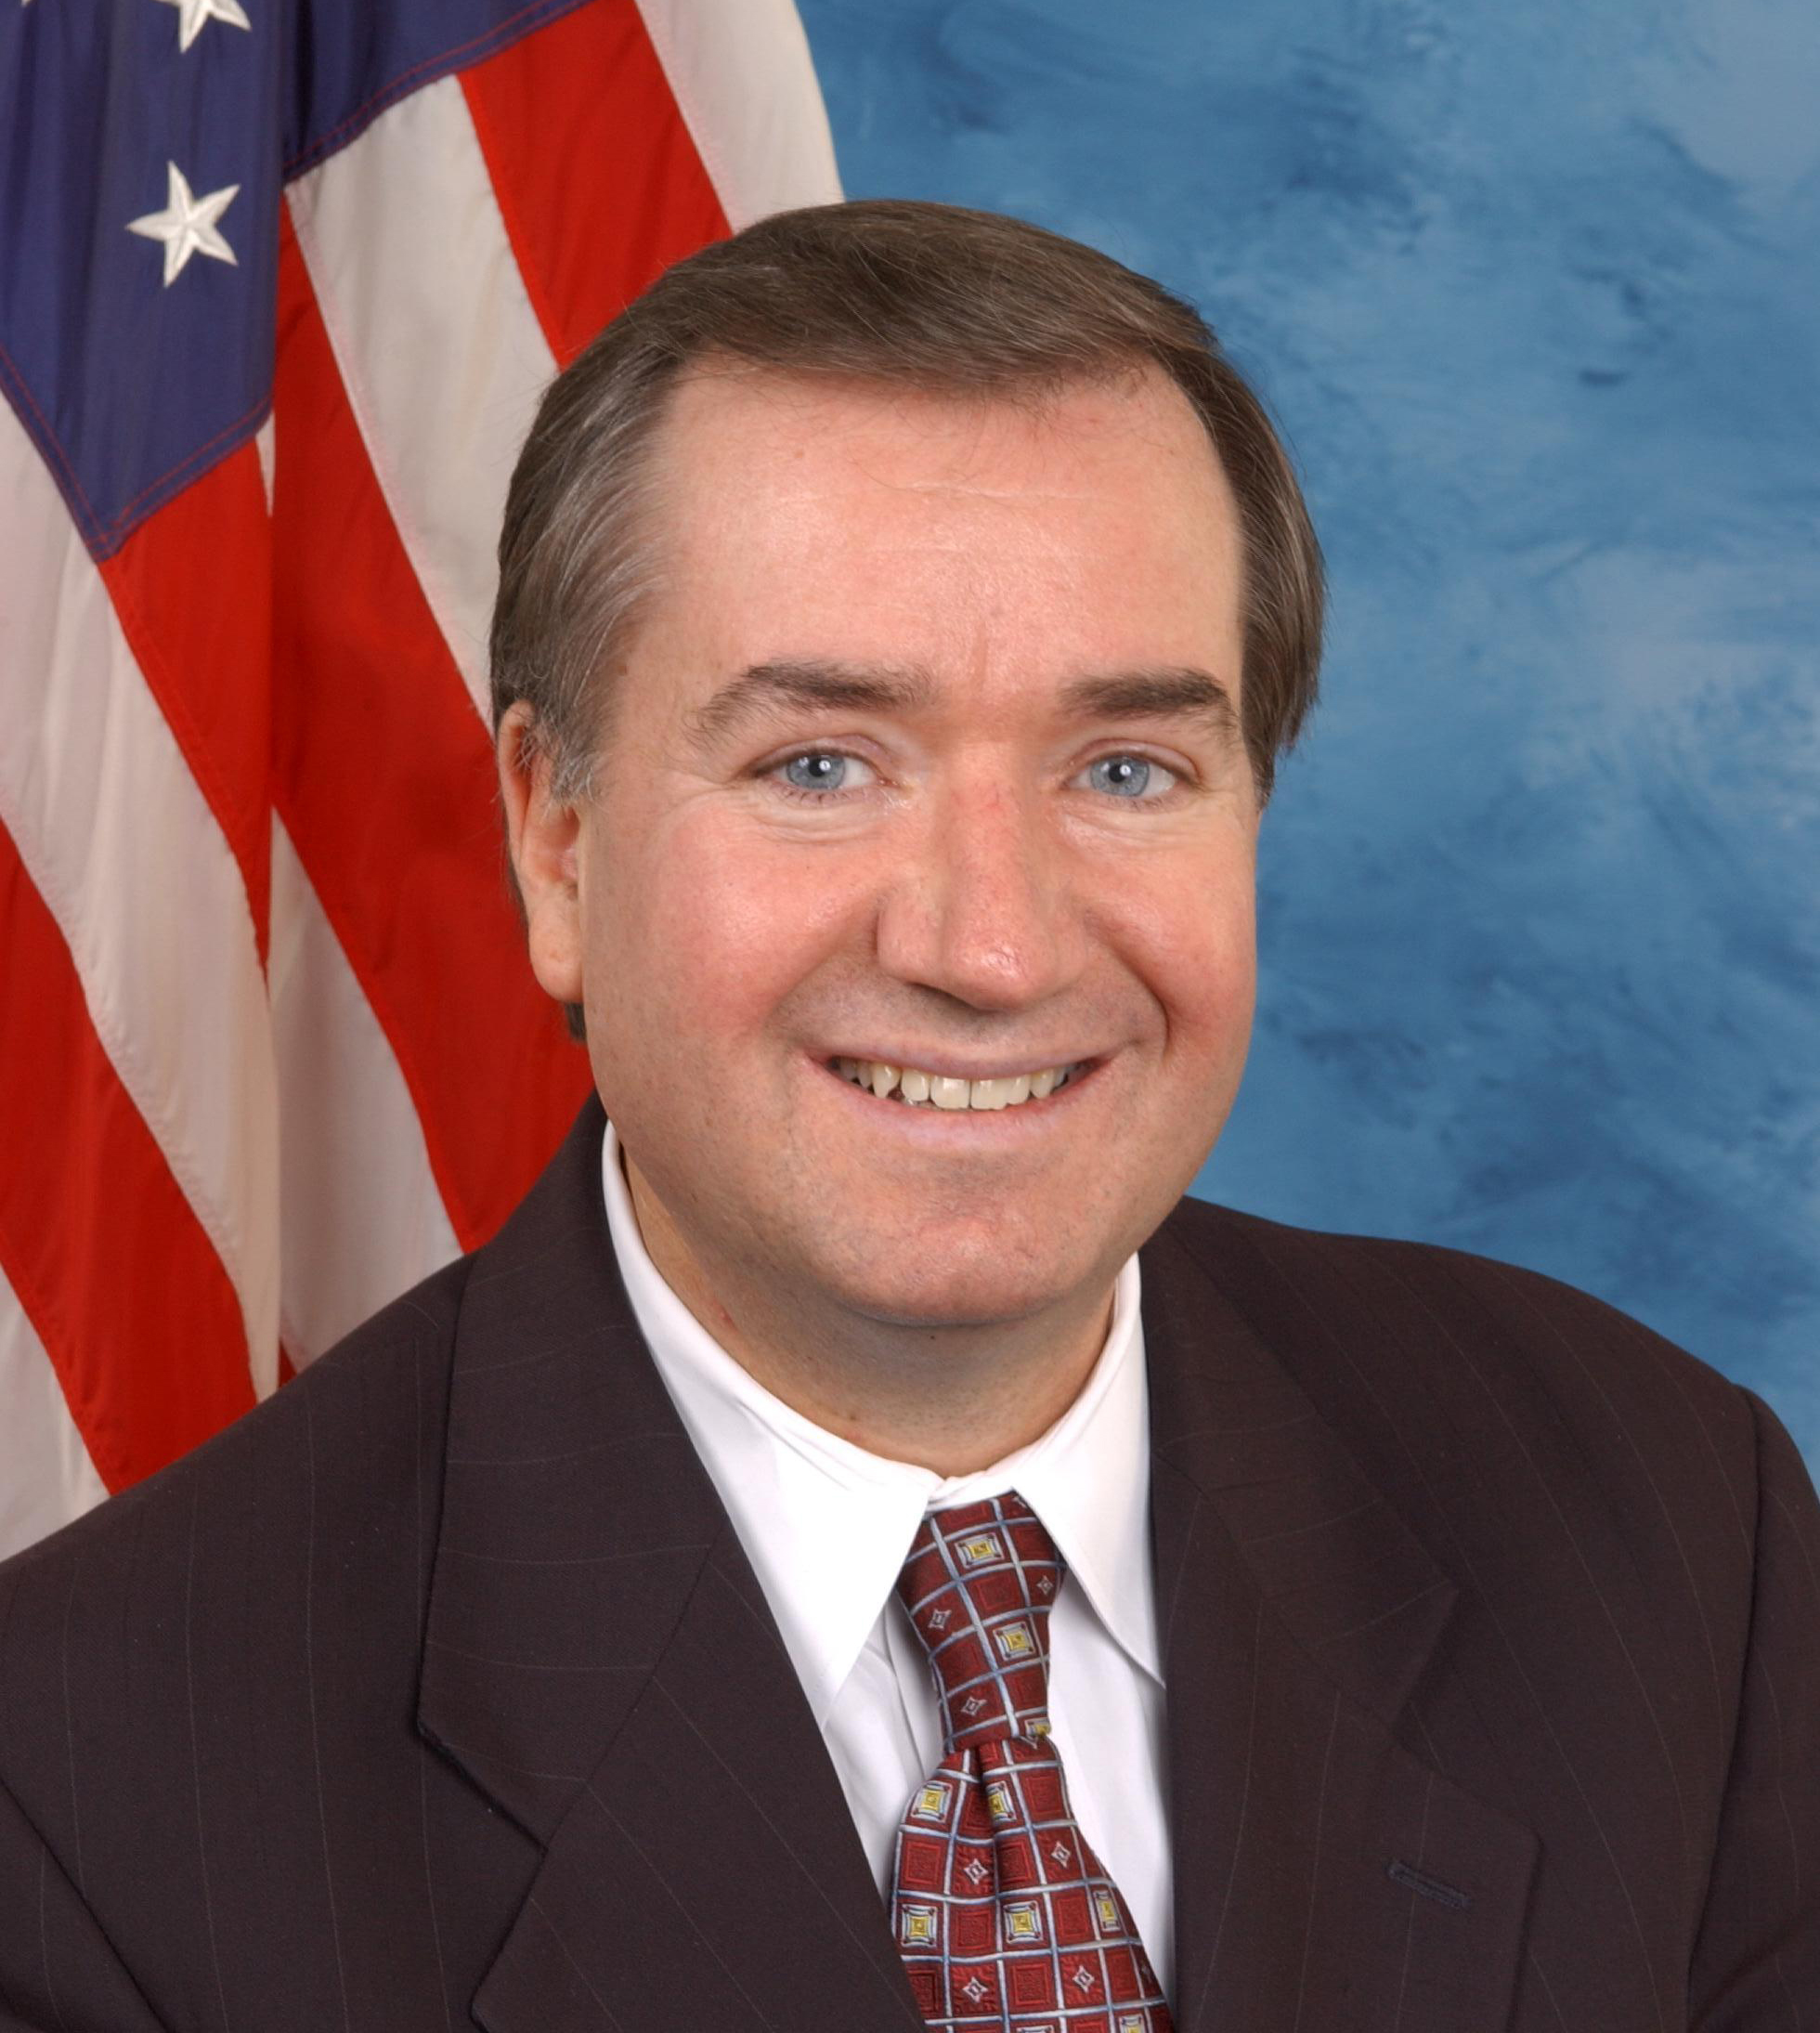 Congressman Ed Royce: “Bringing One Man to Justice Can Lead to Peace”